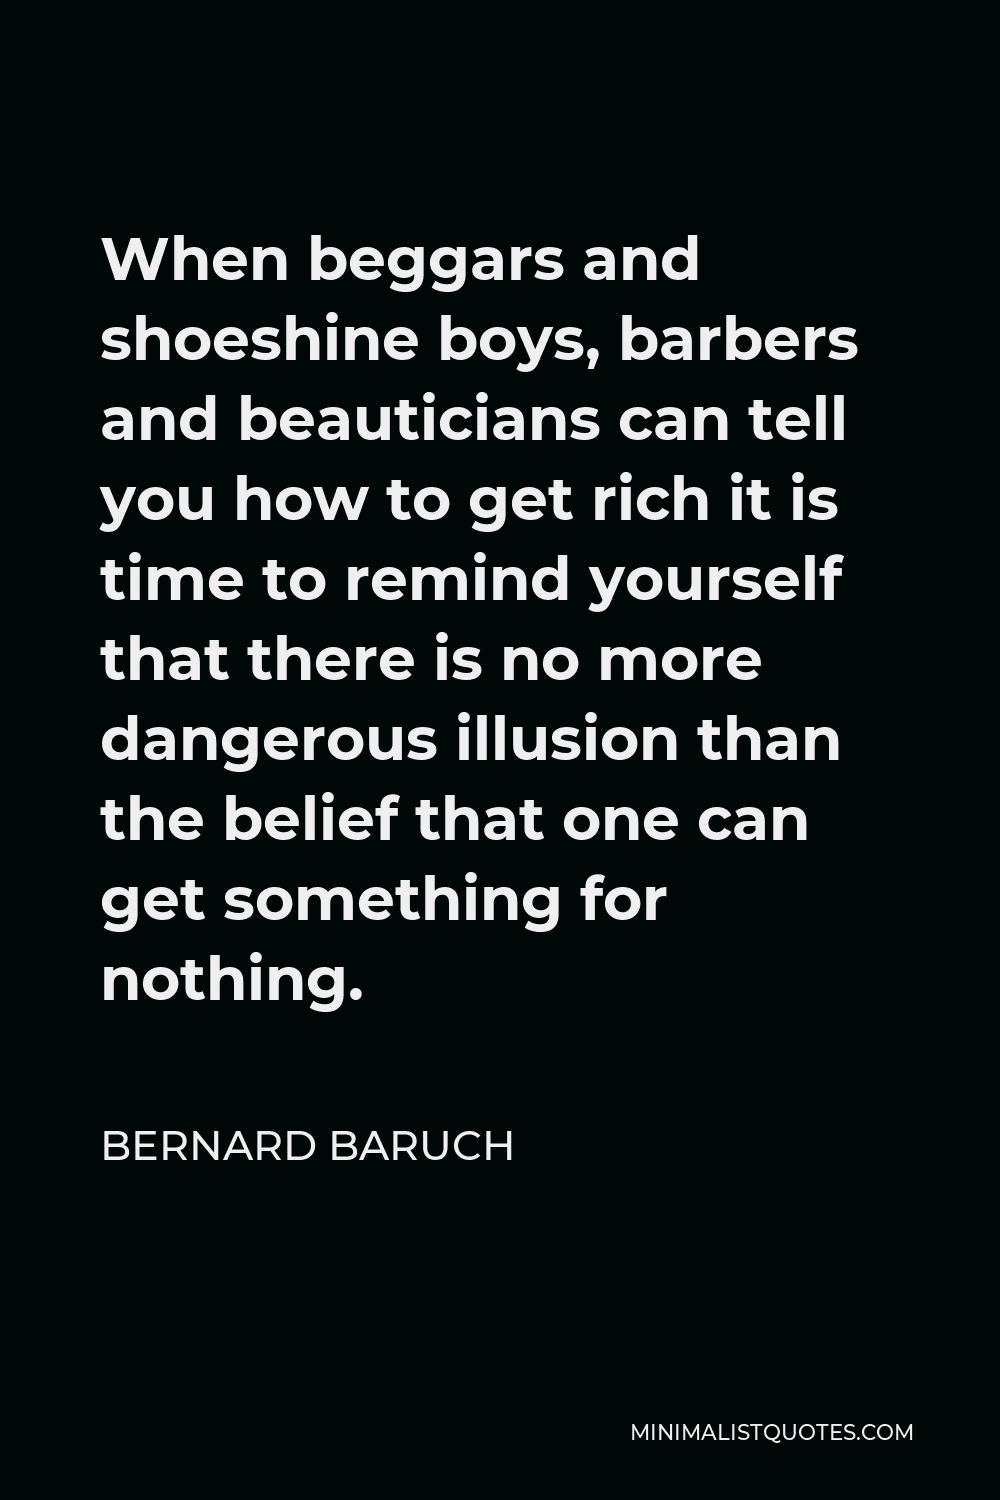 Bernard Baruch Quote - When beggars and shoeshine boys, barbers and beauticians can tell you how to get rich it is time to remind yourself that there is no more dangerous illusion than the belief that one can get something for nothing.